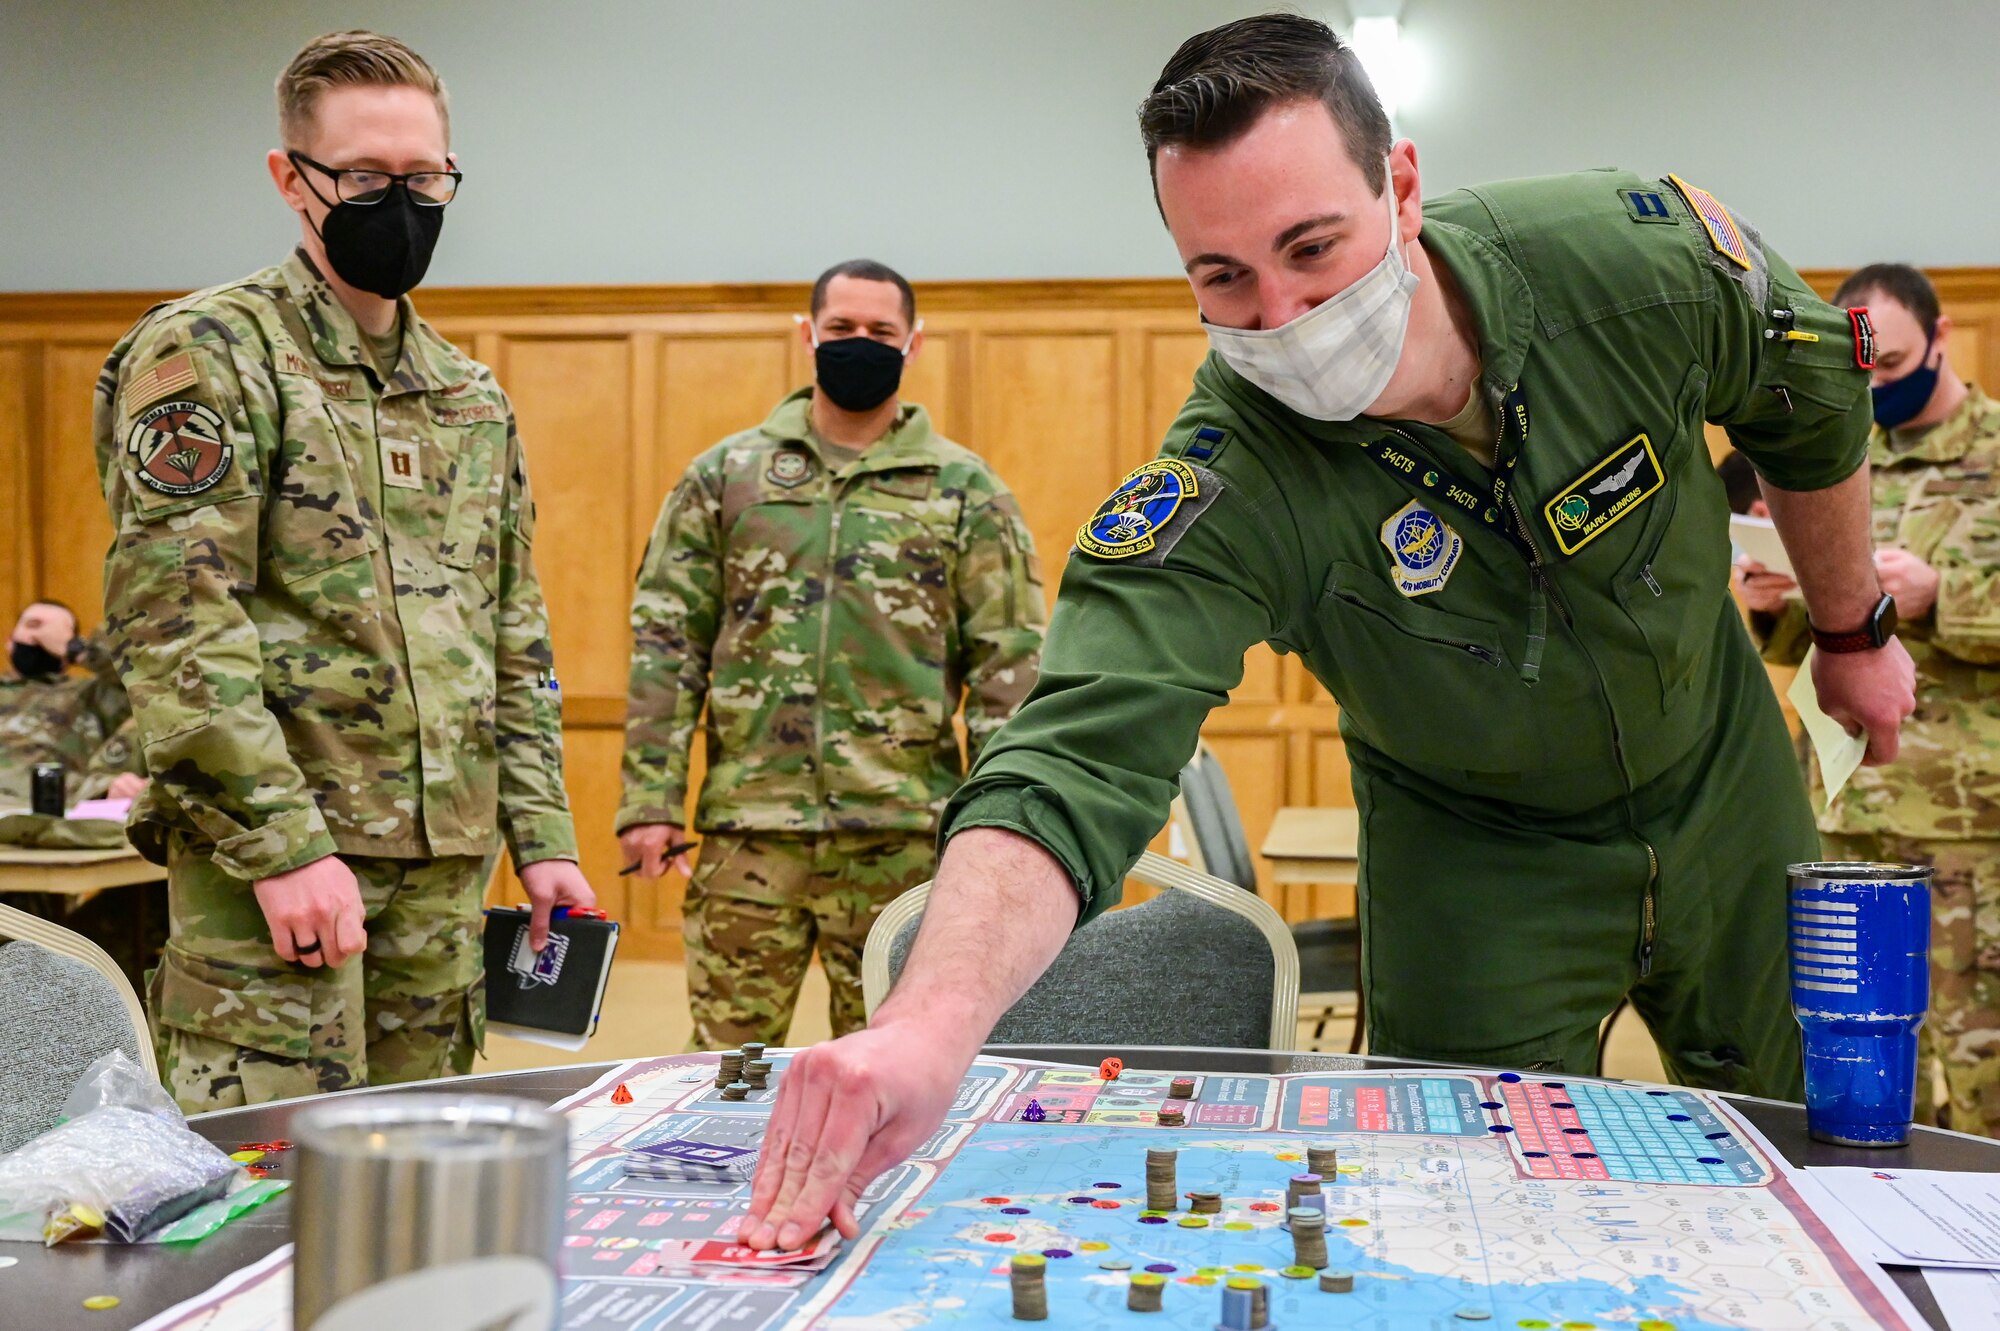 Capt. Mark Hunkins, 34th Combat Training Squadron, picks up a card from the game board during a KingFish Agile Combat Employment exercise